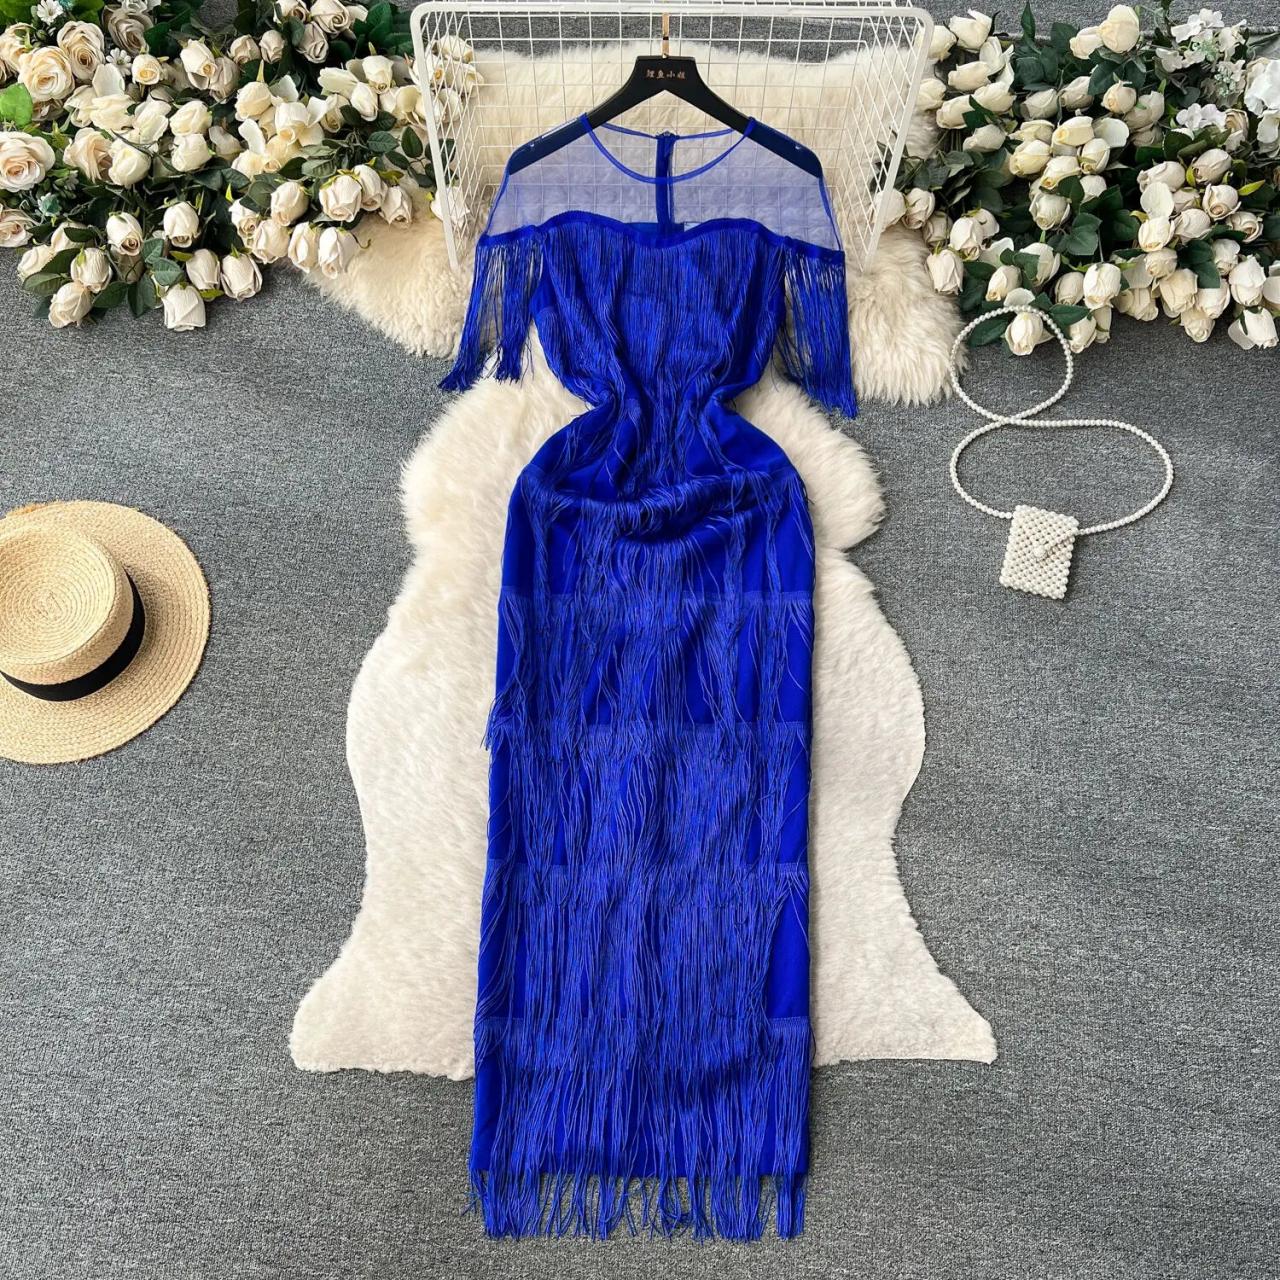 Elegant Royal Blue Tassel Evening Gown With Sheer Overlay